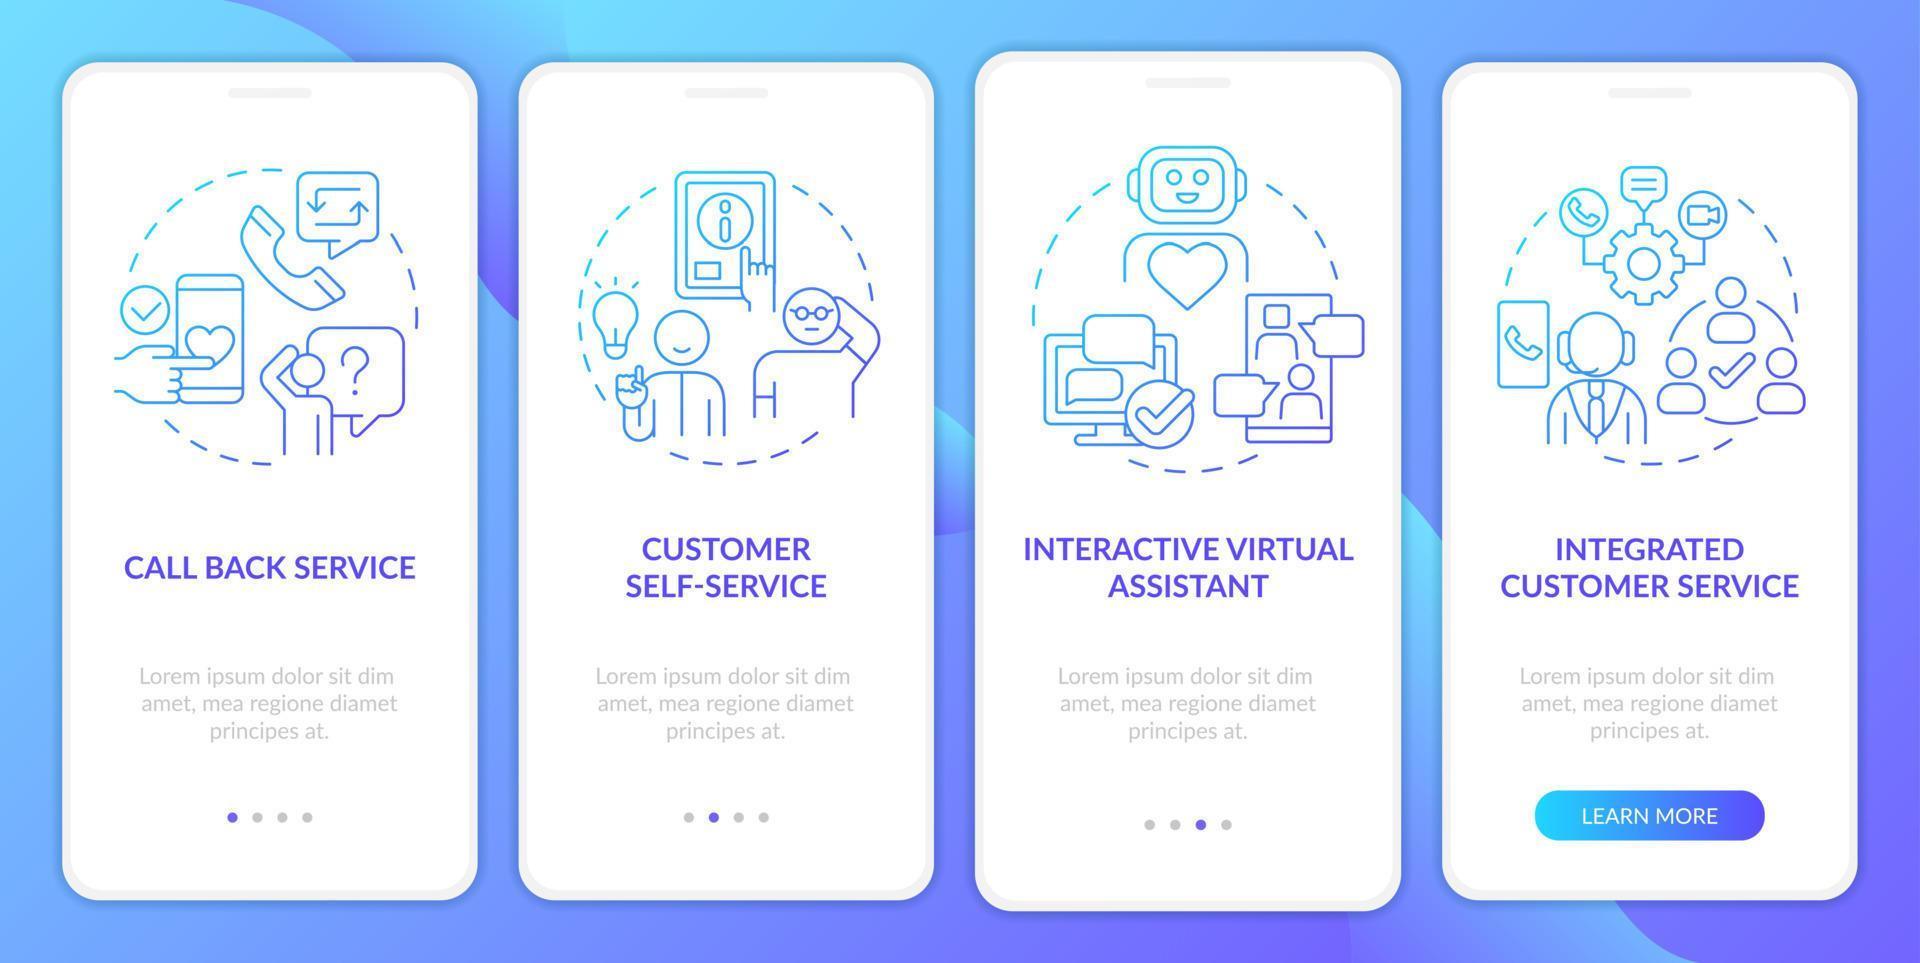 Types of customer service blue gradient onboarding mobile app screen. Walkthrough 4 steps graphic instructions pages with linear concepts. UI, UX, GUI template. vector